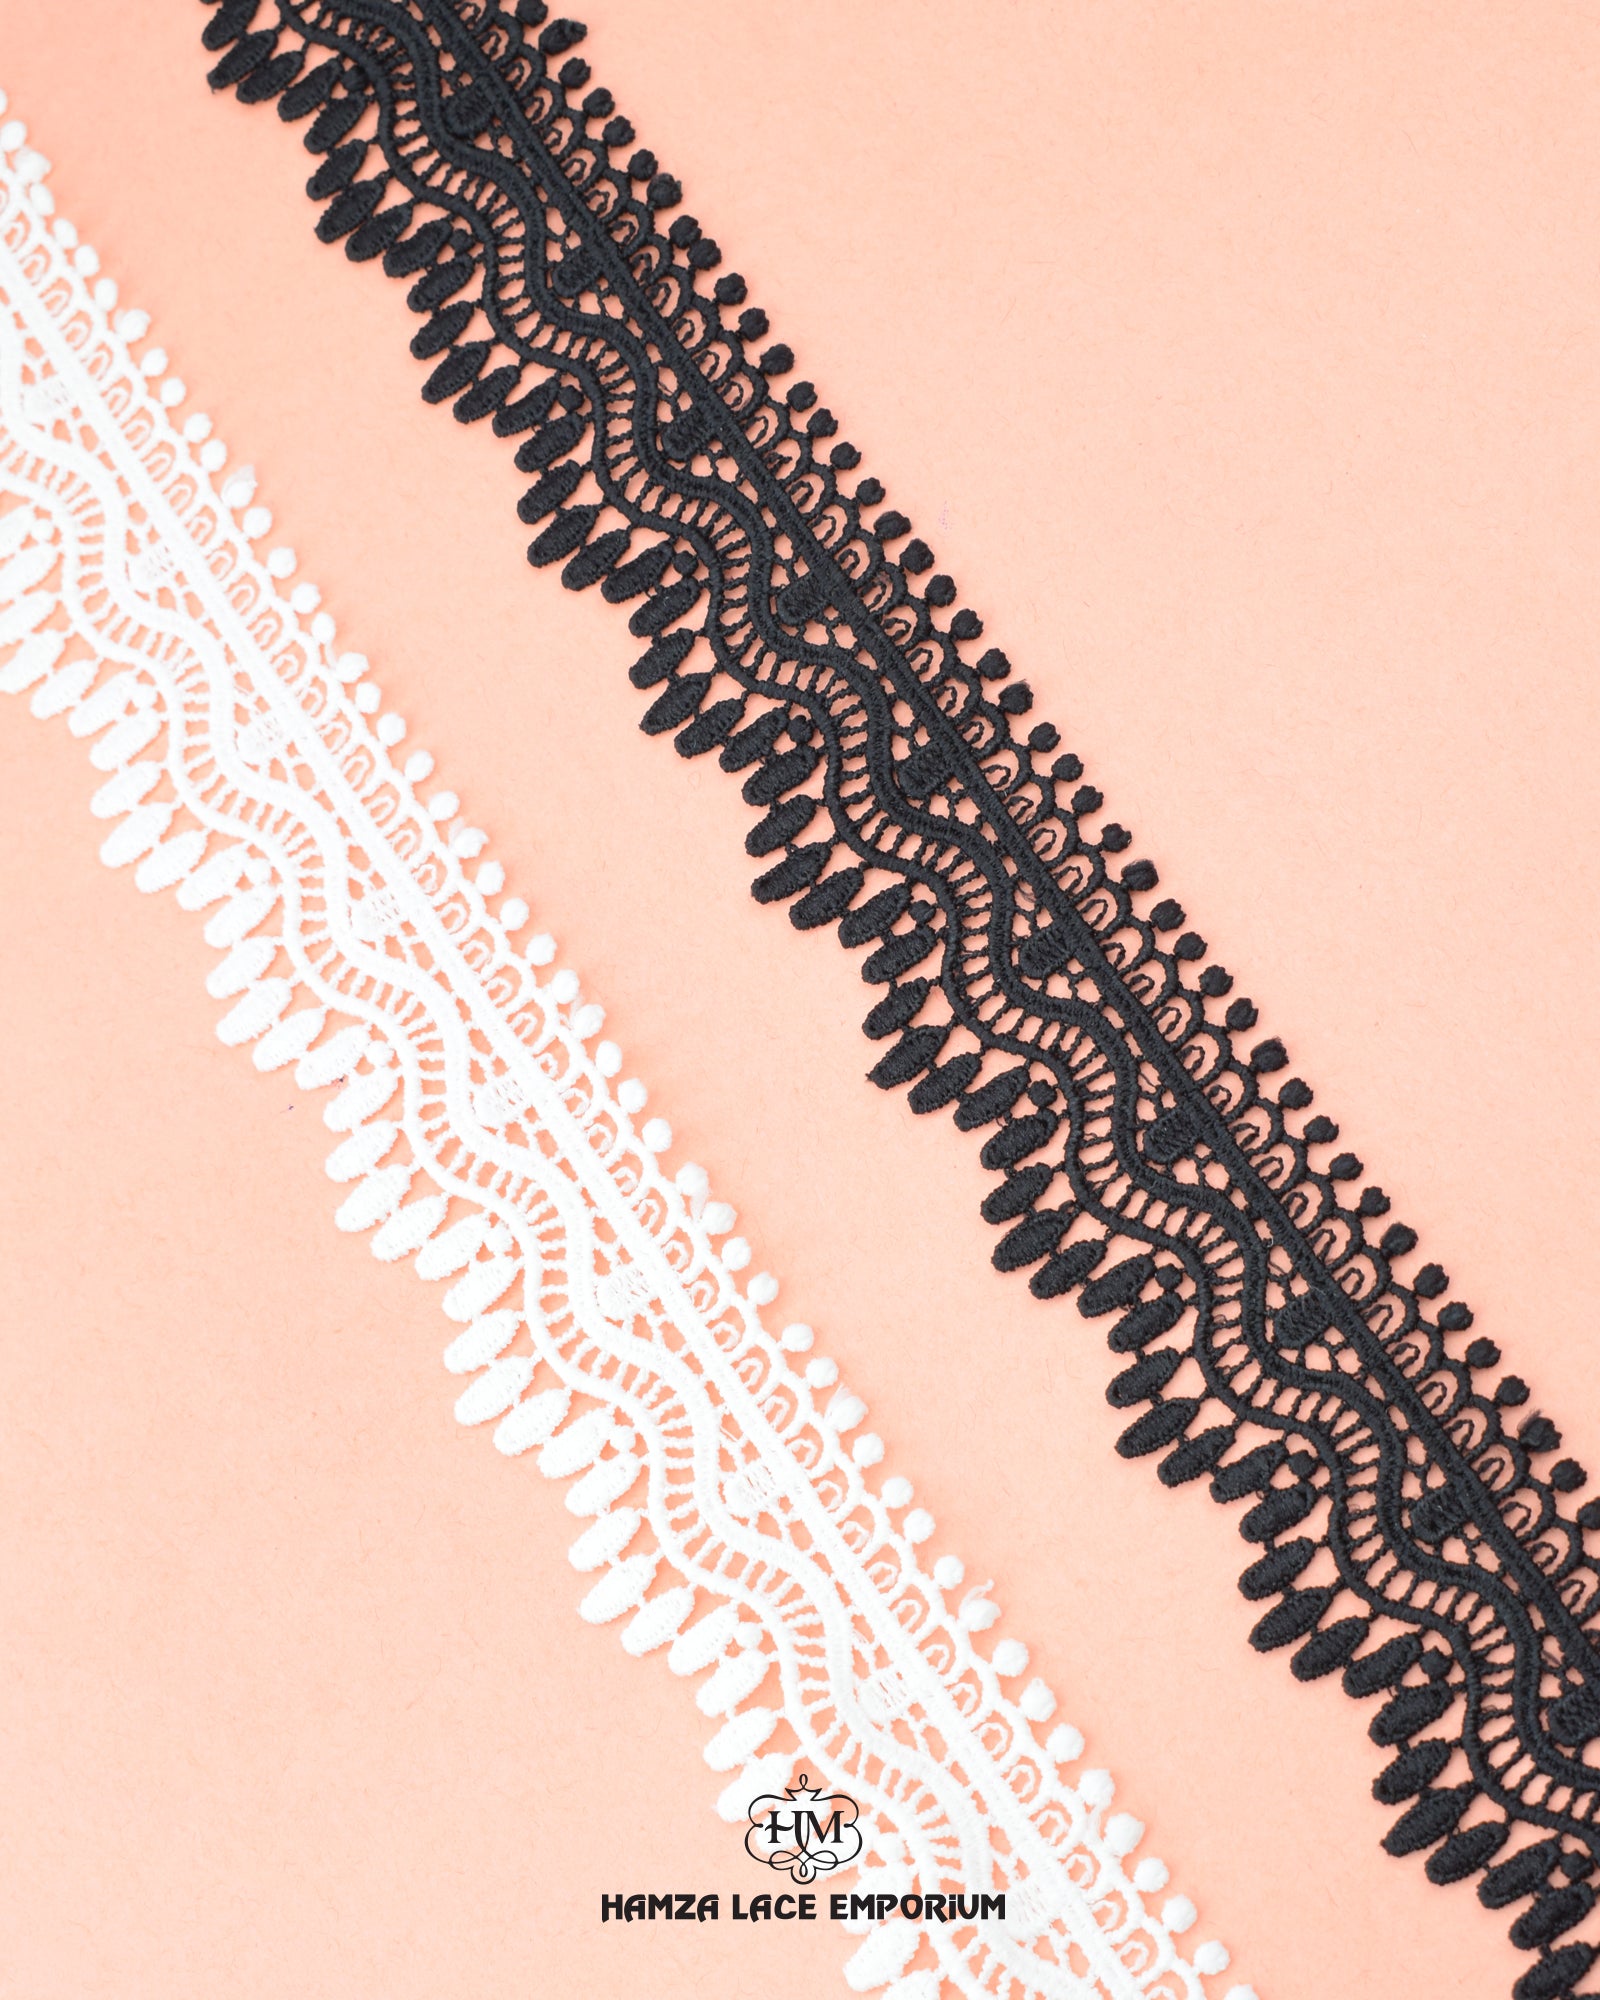 One white and one black color of the product 'Edging Lace 16167' is shown side by side on a pink background